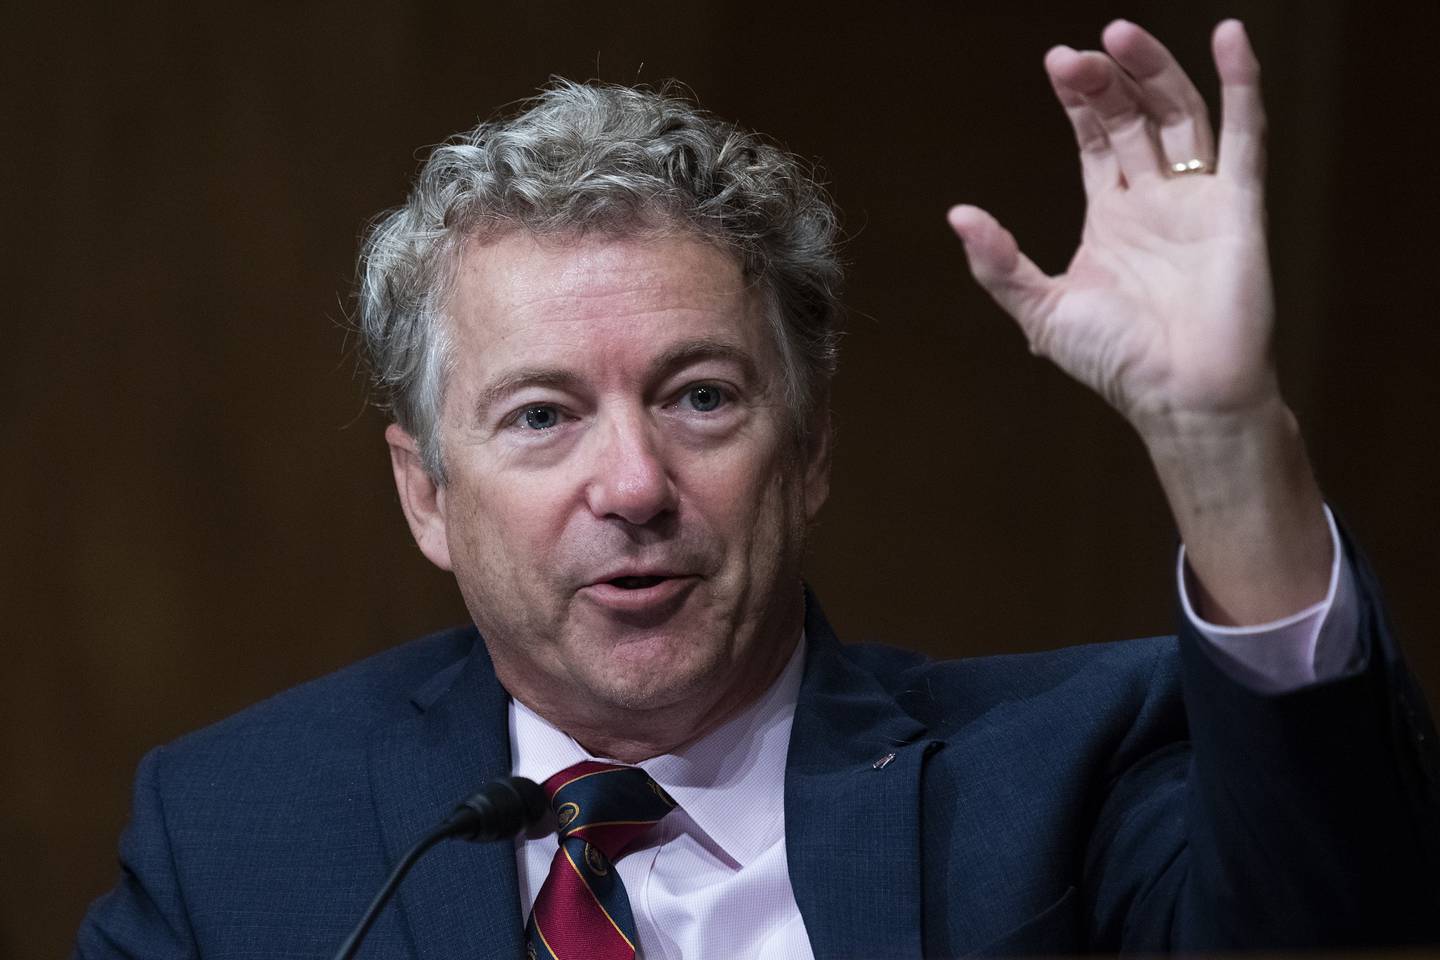 In this Sept. 24, 2020, file photo, Sen. Rand Paul, R-Ky., speaks during a Senate Homeland Security and Governmental Affairs Committee hearing on Capitol Hill in Washington.